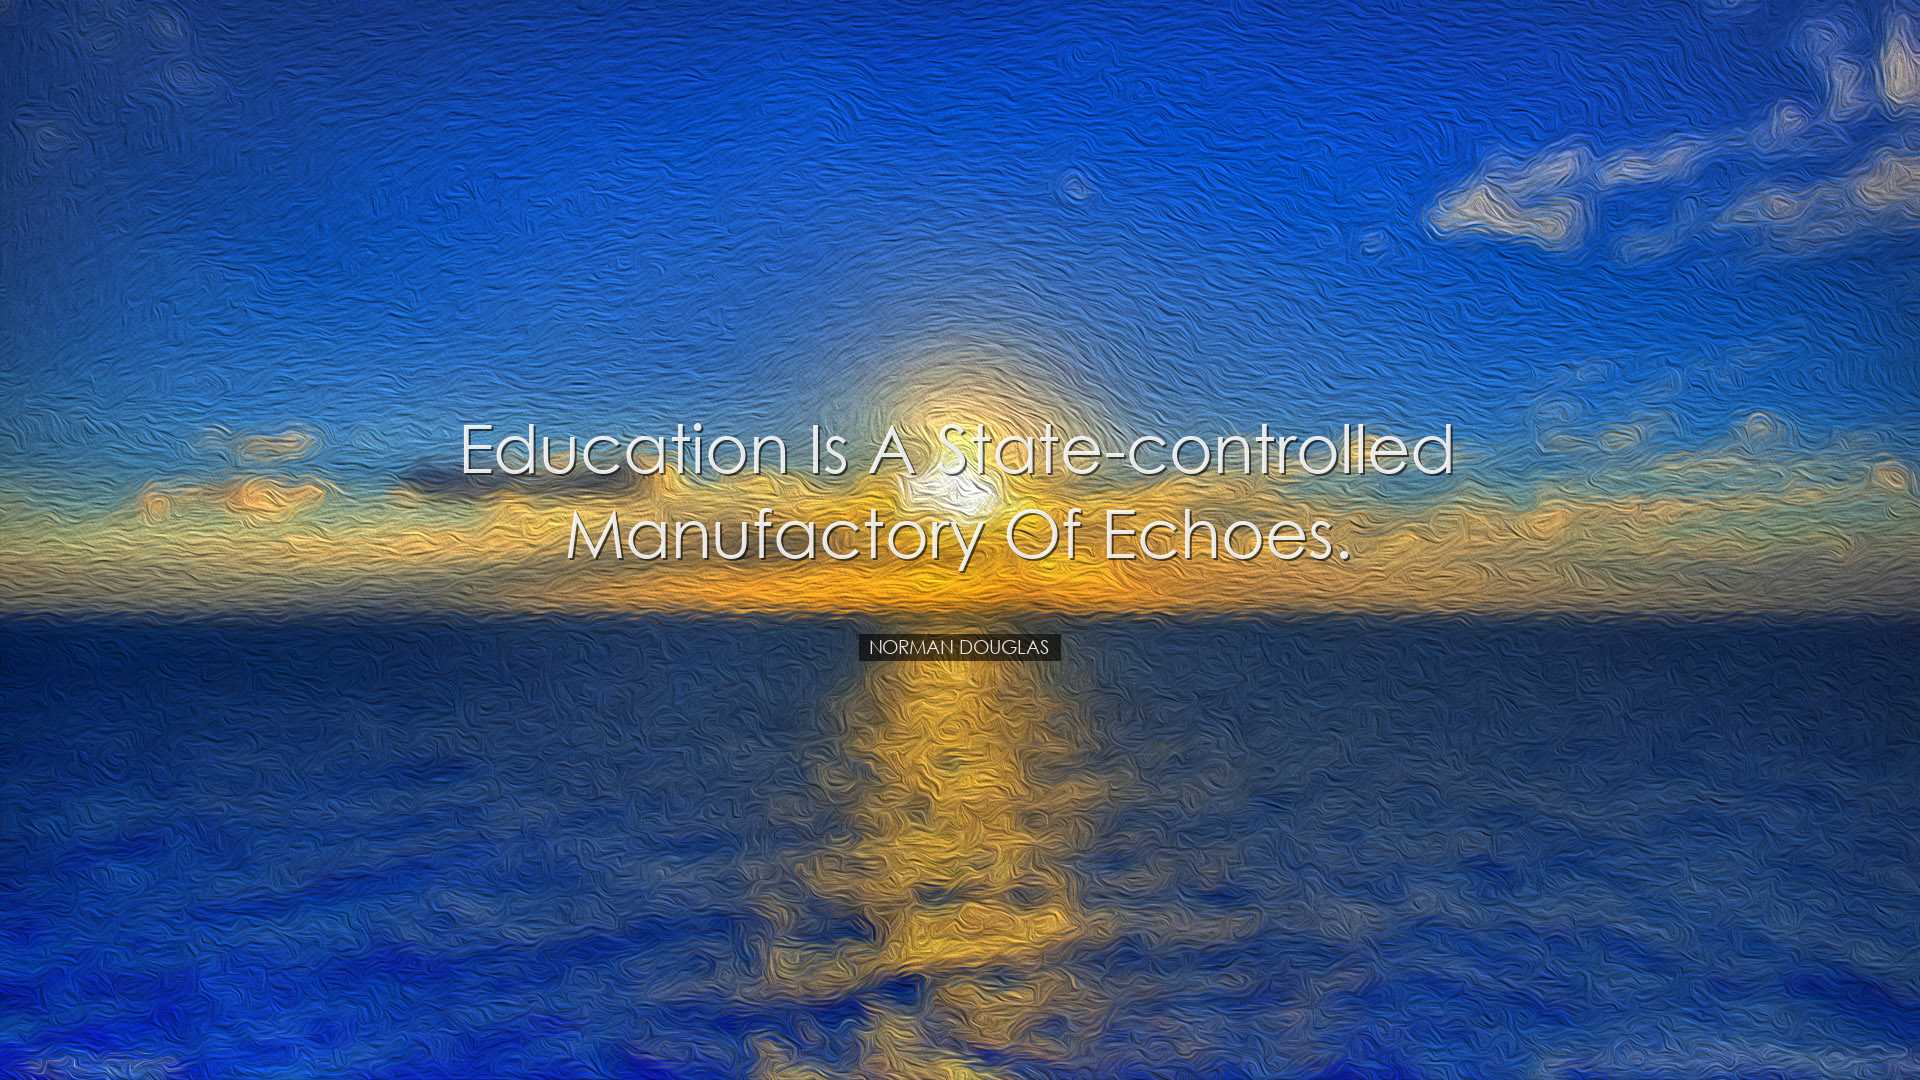 Education is a state-controlled manufactory of echoes. - Norman Do